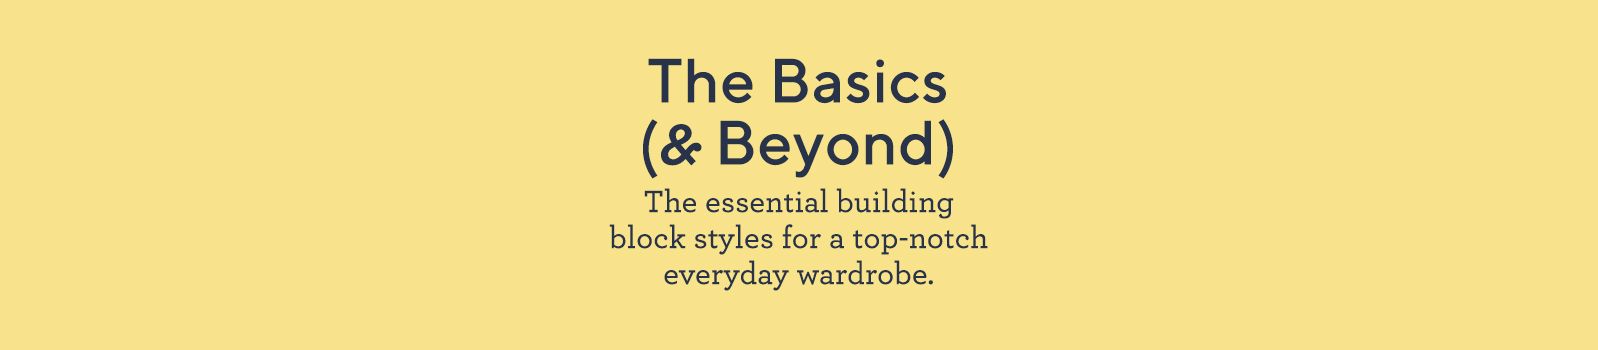 The Basics (& Beyond).  The essential building block styles for a top-notch everyday wardrobe.